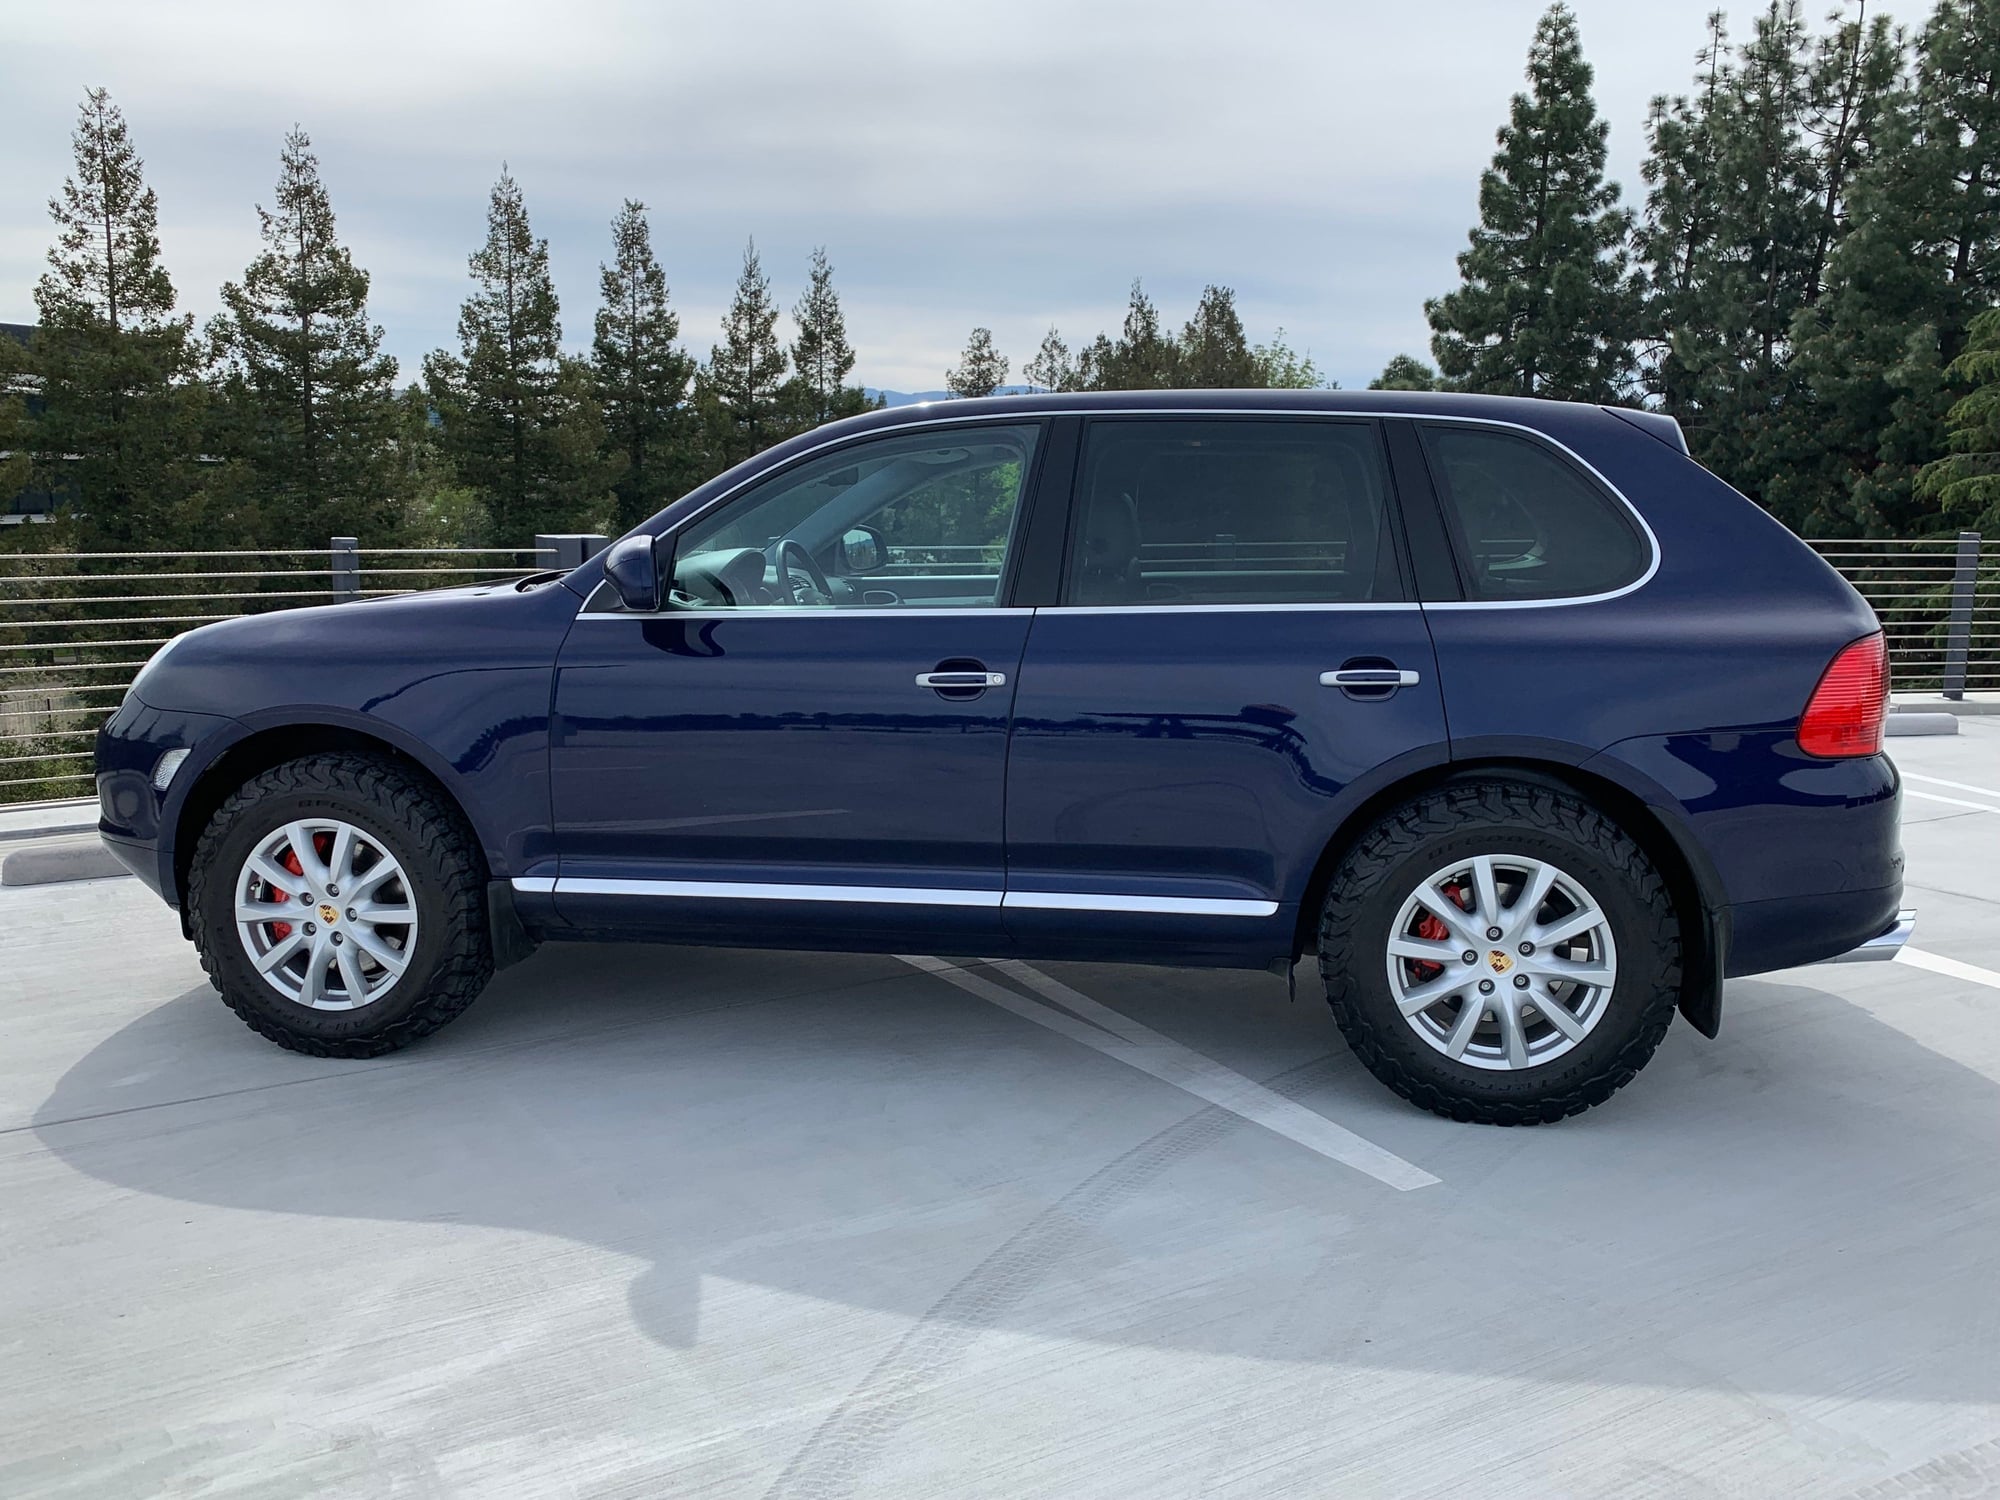 2004 Porsche Cayenne - $12k - 2004 955TT Cayenne Turbo Lapis Blue 98k miles, sorted, intake, exhaust - Used - VIN WP1AC29P64LA94556 - 98,064 Miles - 8 cyl - AWD - Automatic - SUV - Blue - Cupertino, CA 95014, United States